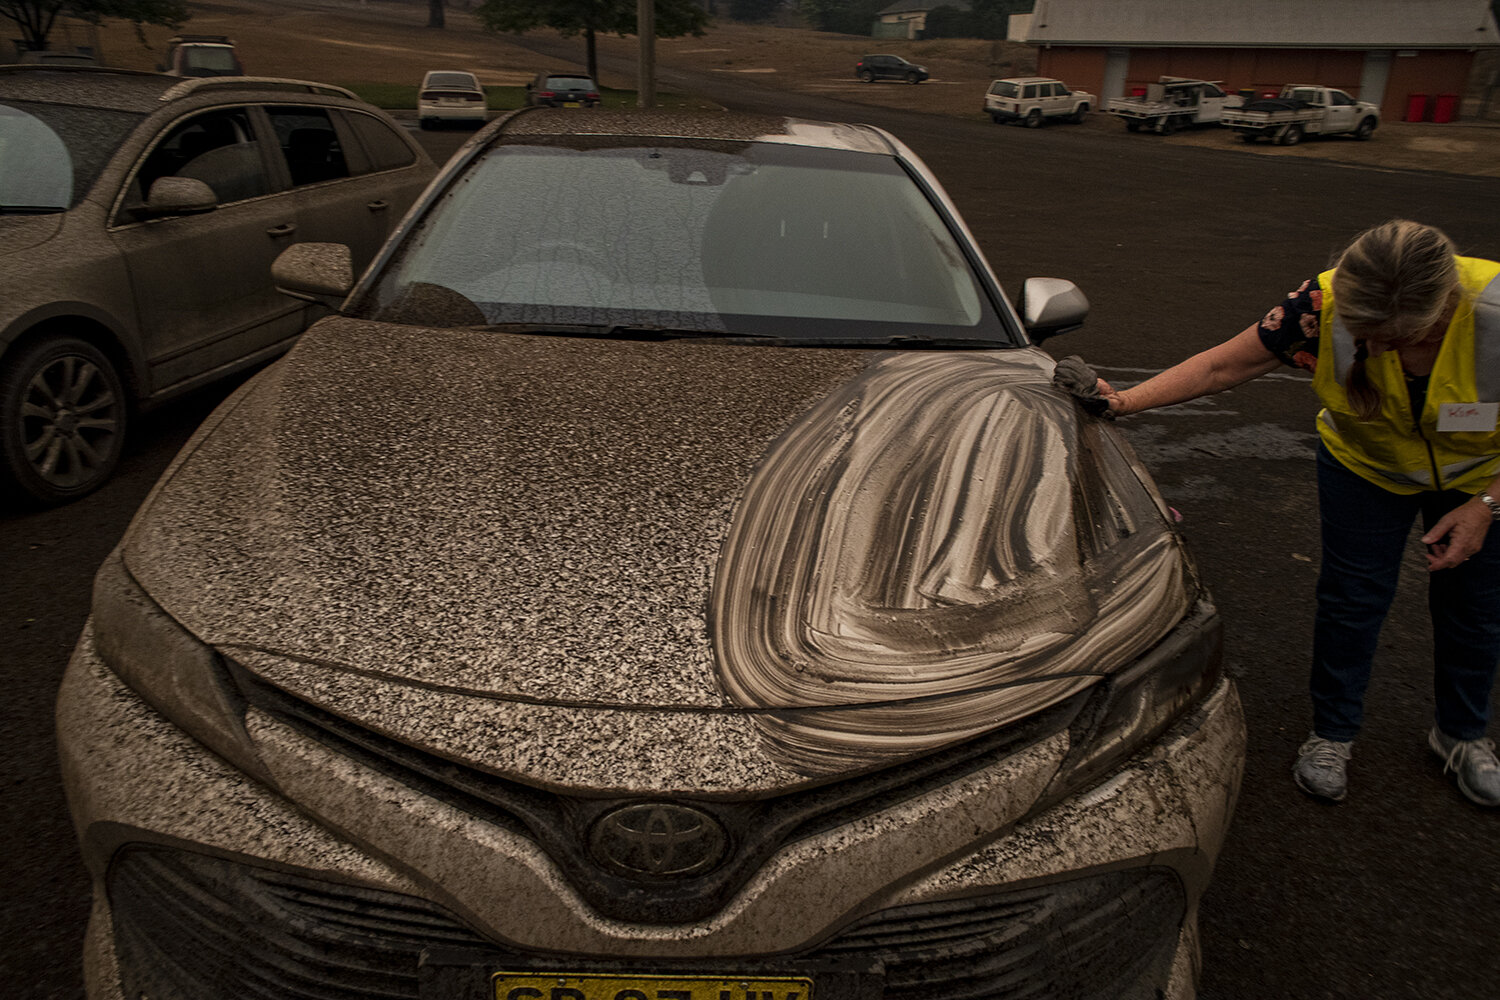  Ten centimetres of ash from the fallout of the pyrocumulus cloud that formed over the Snowy Monaro region on January 4th 2020, had to be washed from cars and buildings. In the unprecedented ‘Black Summer’ bushfires of 2020, billions of trees and ani